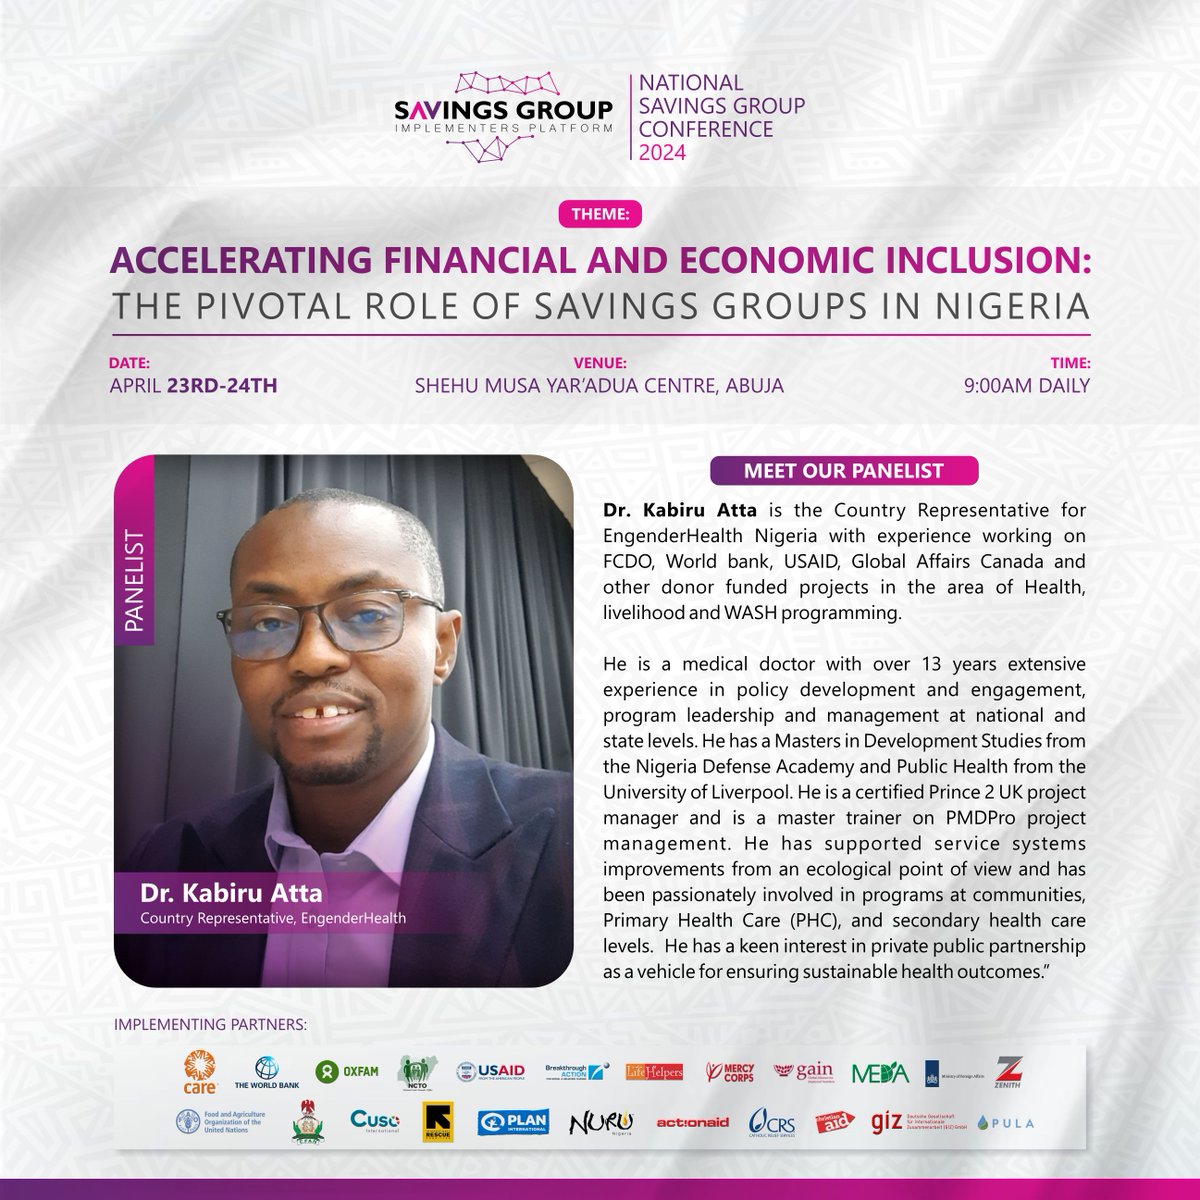 EngenderHealth Nigeria representative will be a panelist at #NSGConference discussing the state of savings groups in Nigeria. Learn how these saving groups empower women in accessing essential health services #GenderEquality #HealthAccess #NSGC2024 @CARE_Nigeria